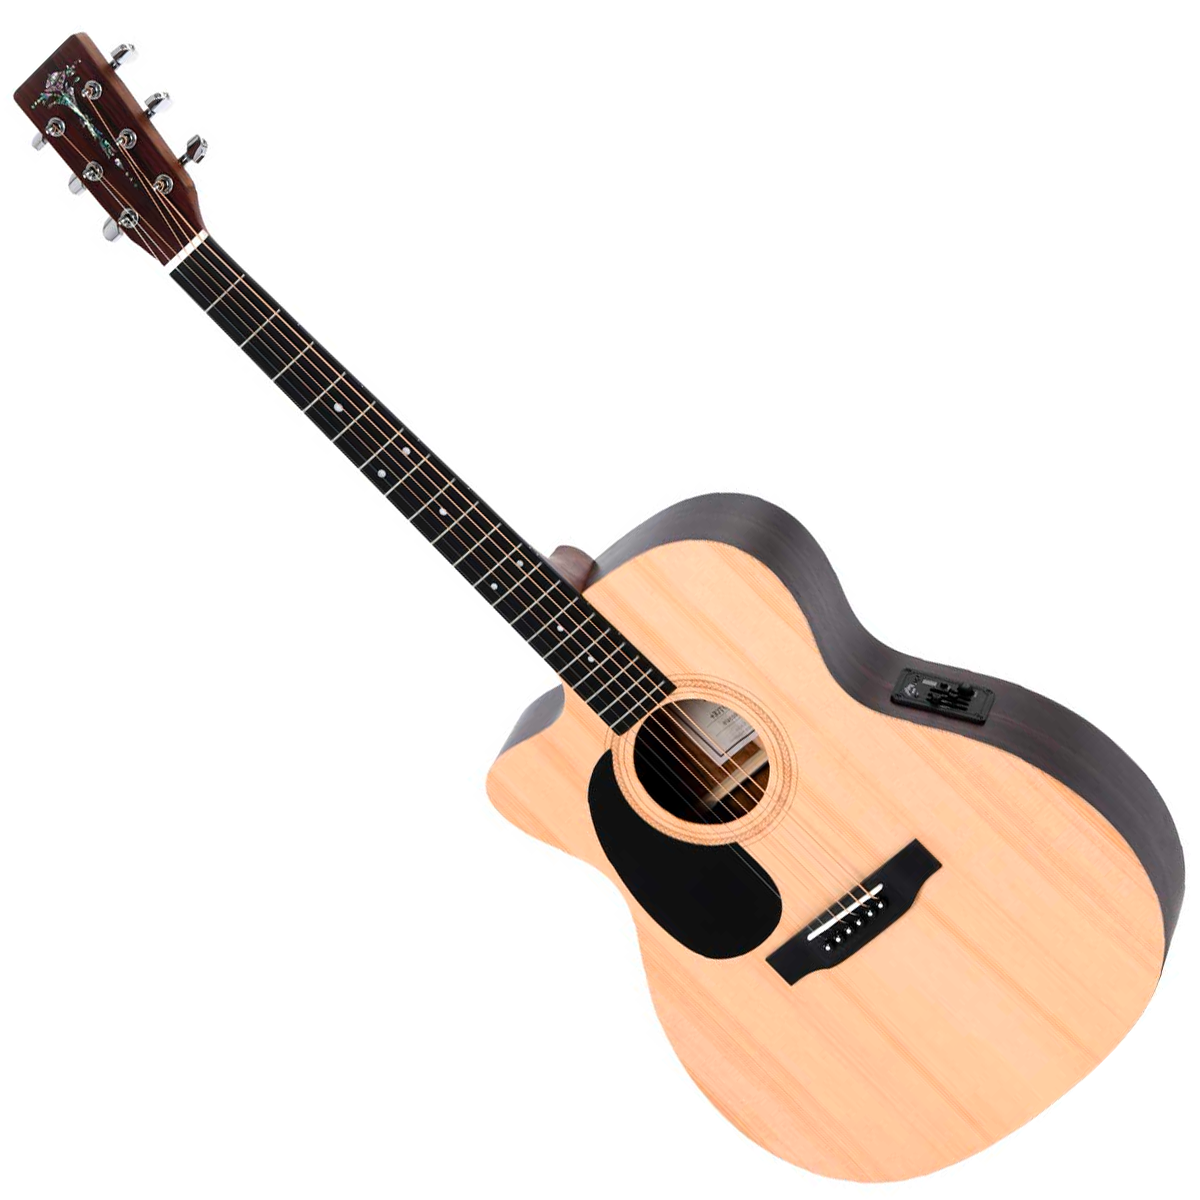 Sigma 000TCEL SE Series Electro Acoustic Guitar - Left Handed